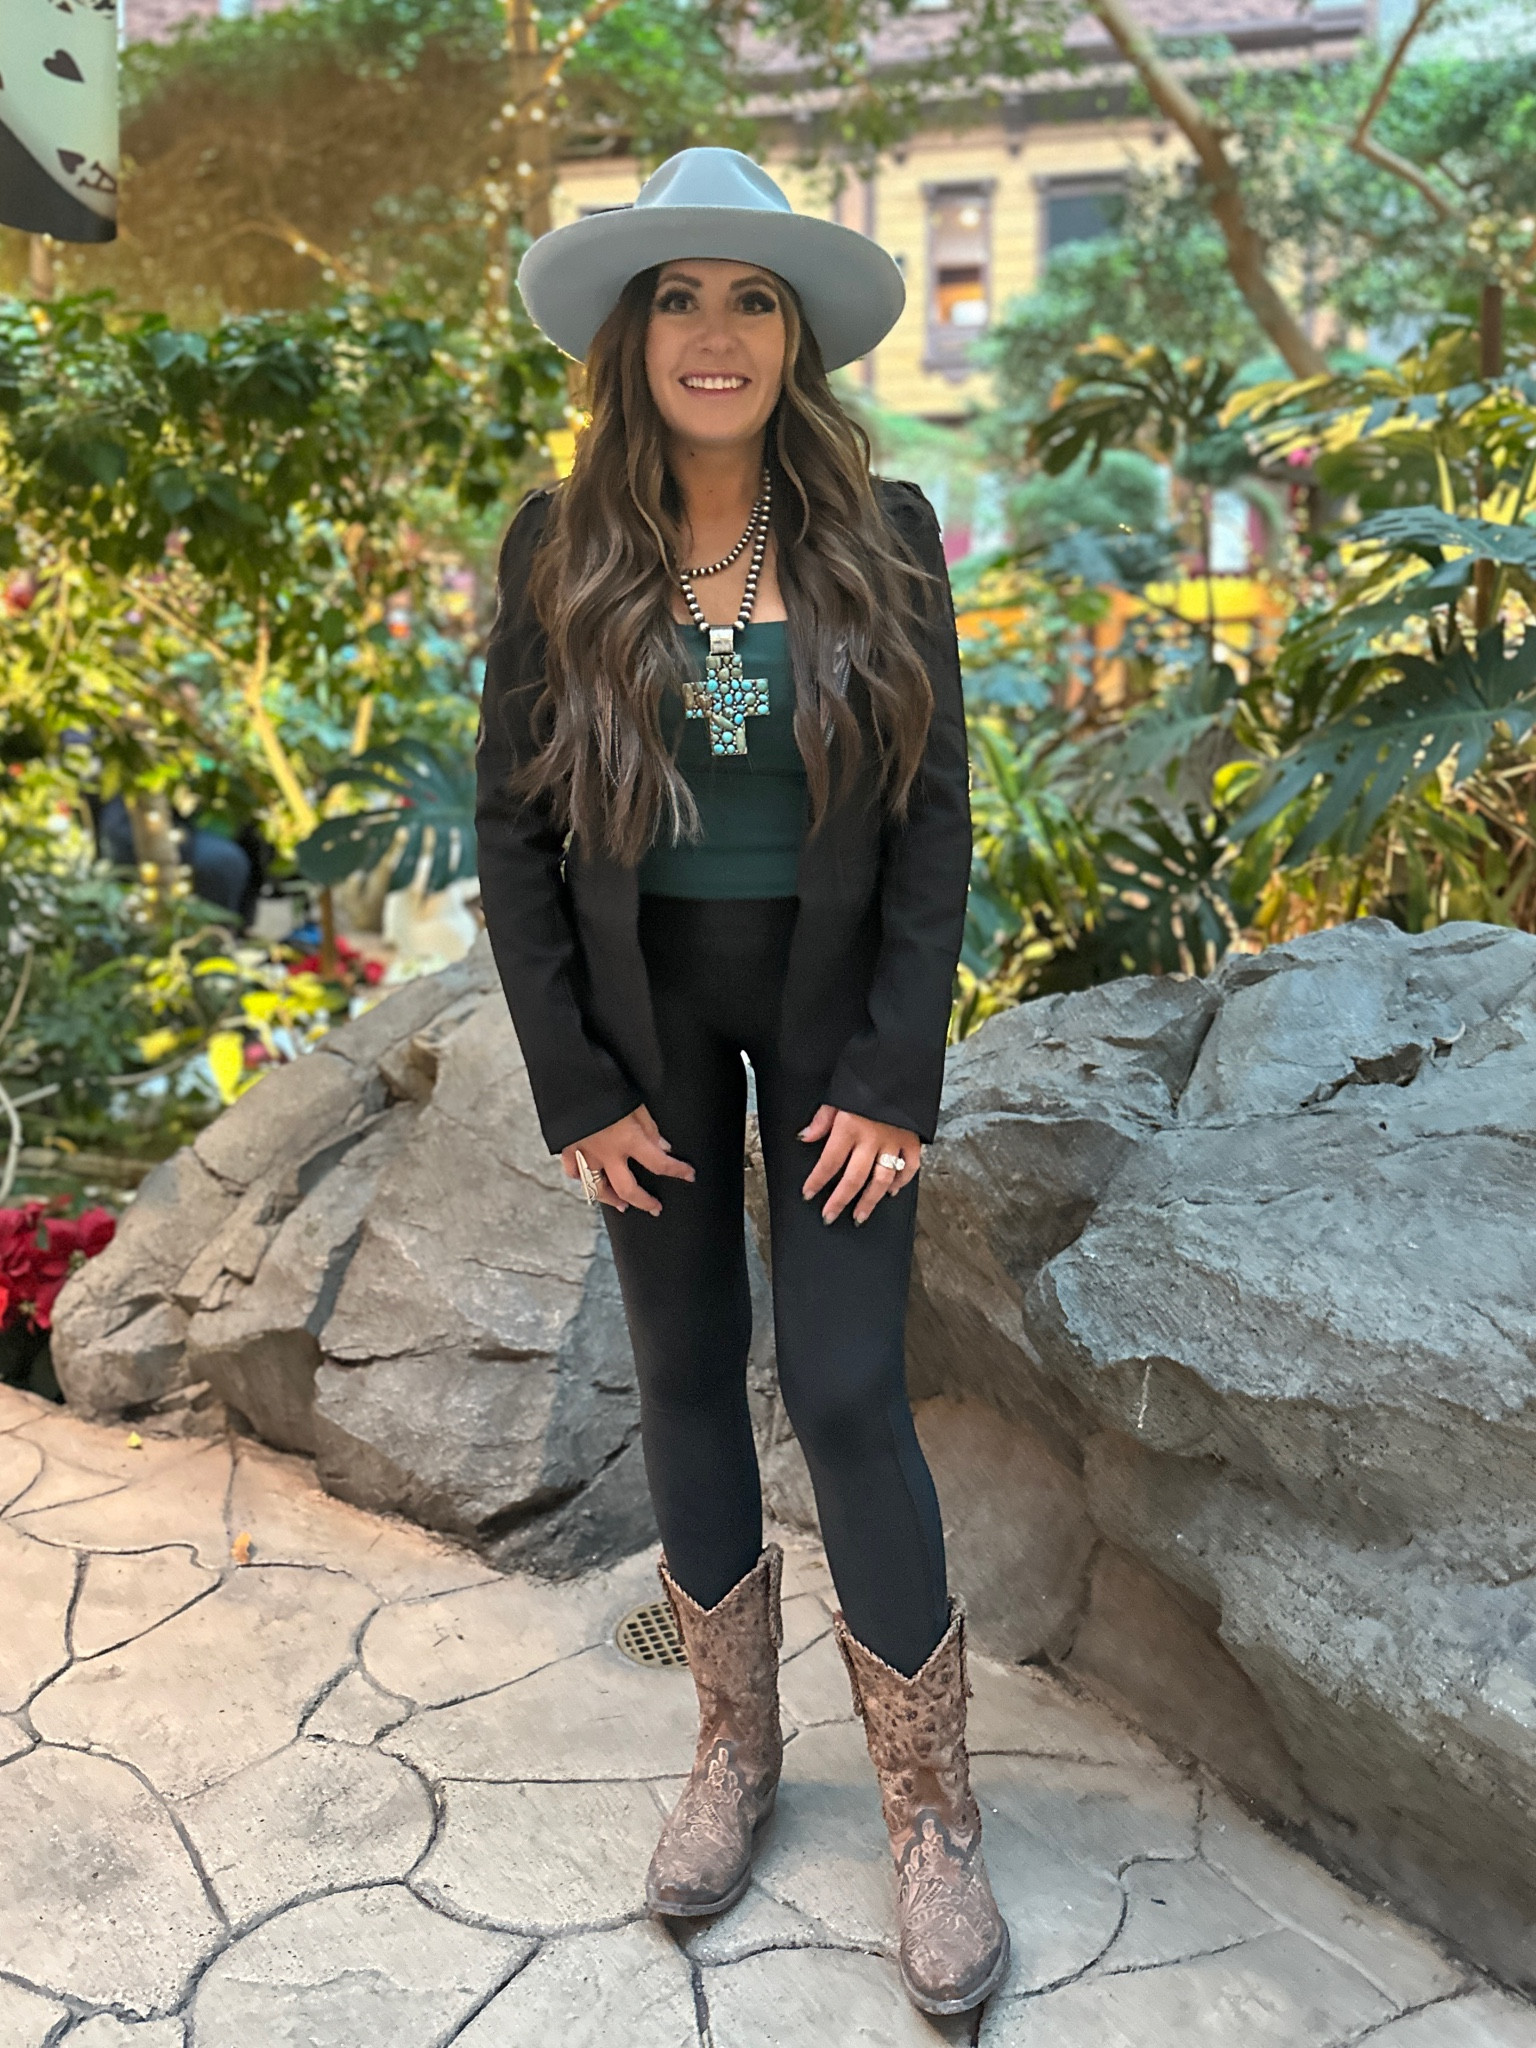 Leggings and cowgirl boots work together, right ♥️♥️ : r